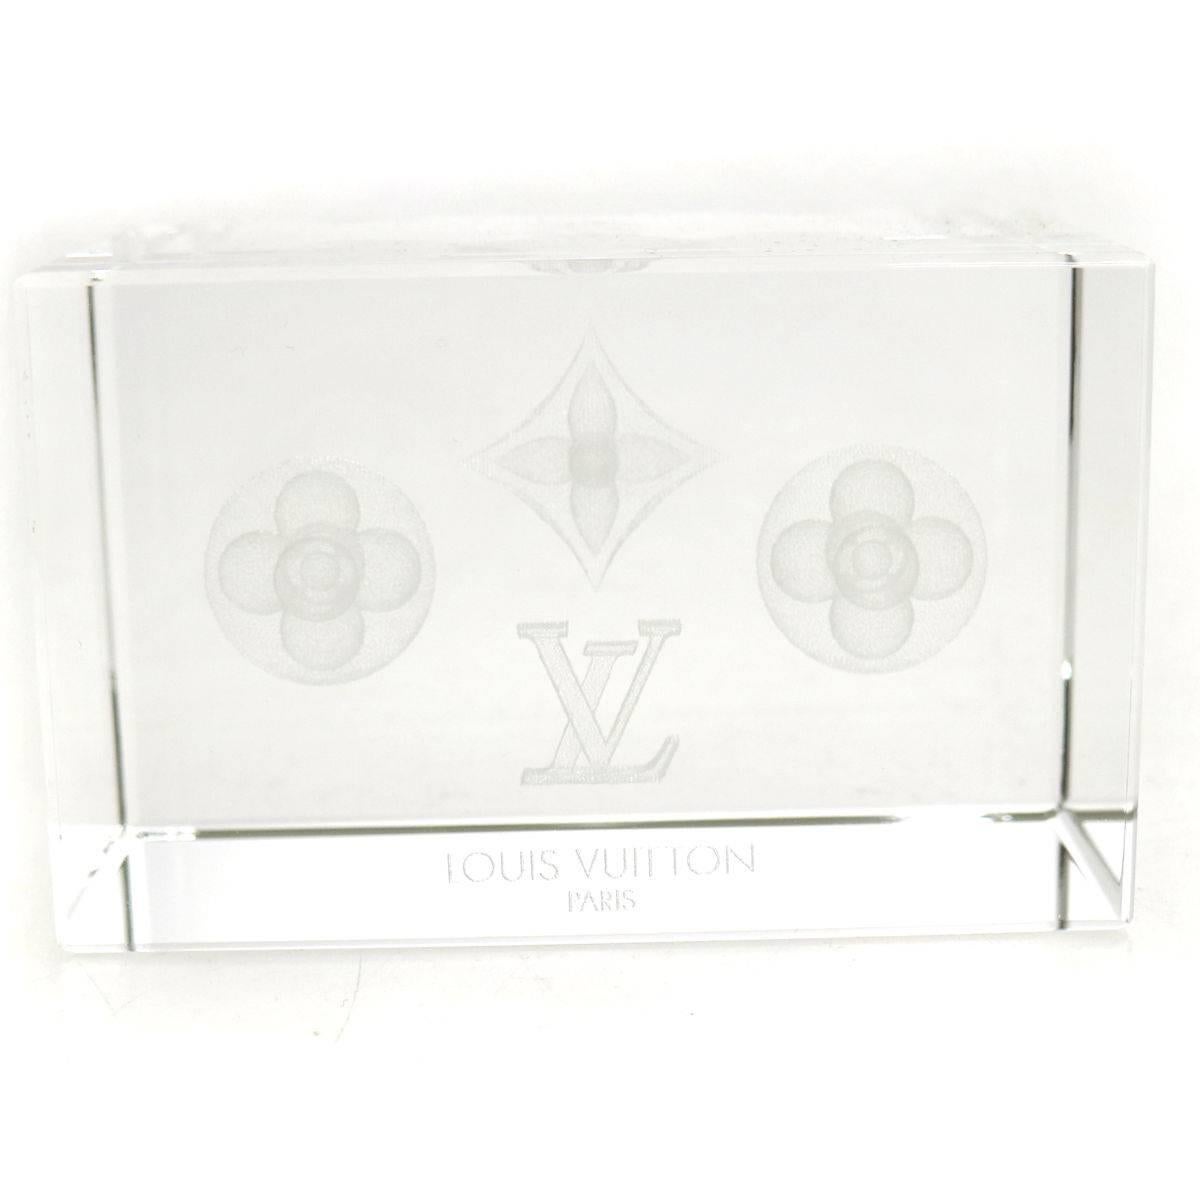 Louis Vuitton Monogram Crystal Cube Desk Table Decorative Paper Weight in Box

Heavy and substantial, this statement home good is the ideal accent for any study, den, office or coffee table.

Crystal
Made in France 
Measures 3